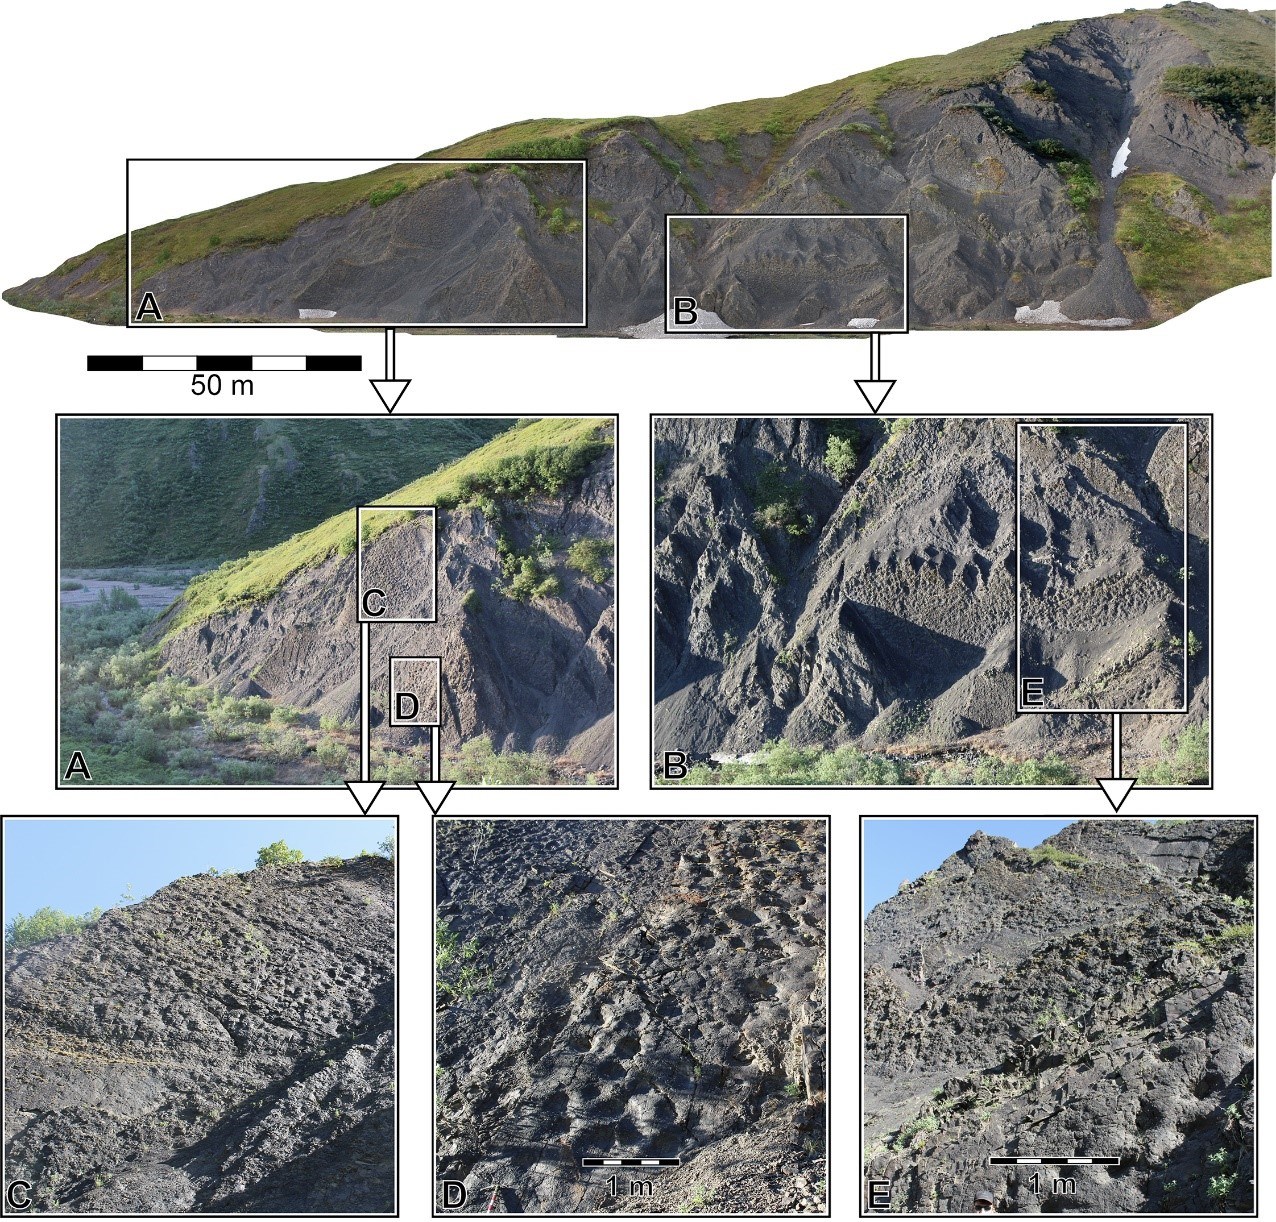 six photos showing rock exposture and study areas